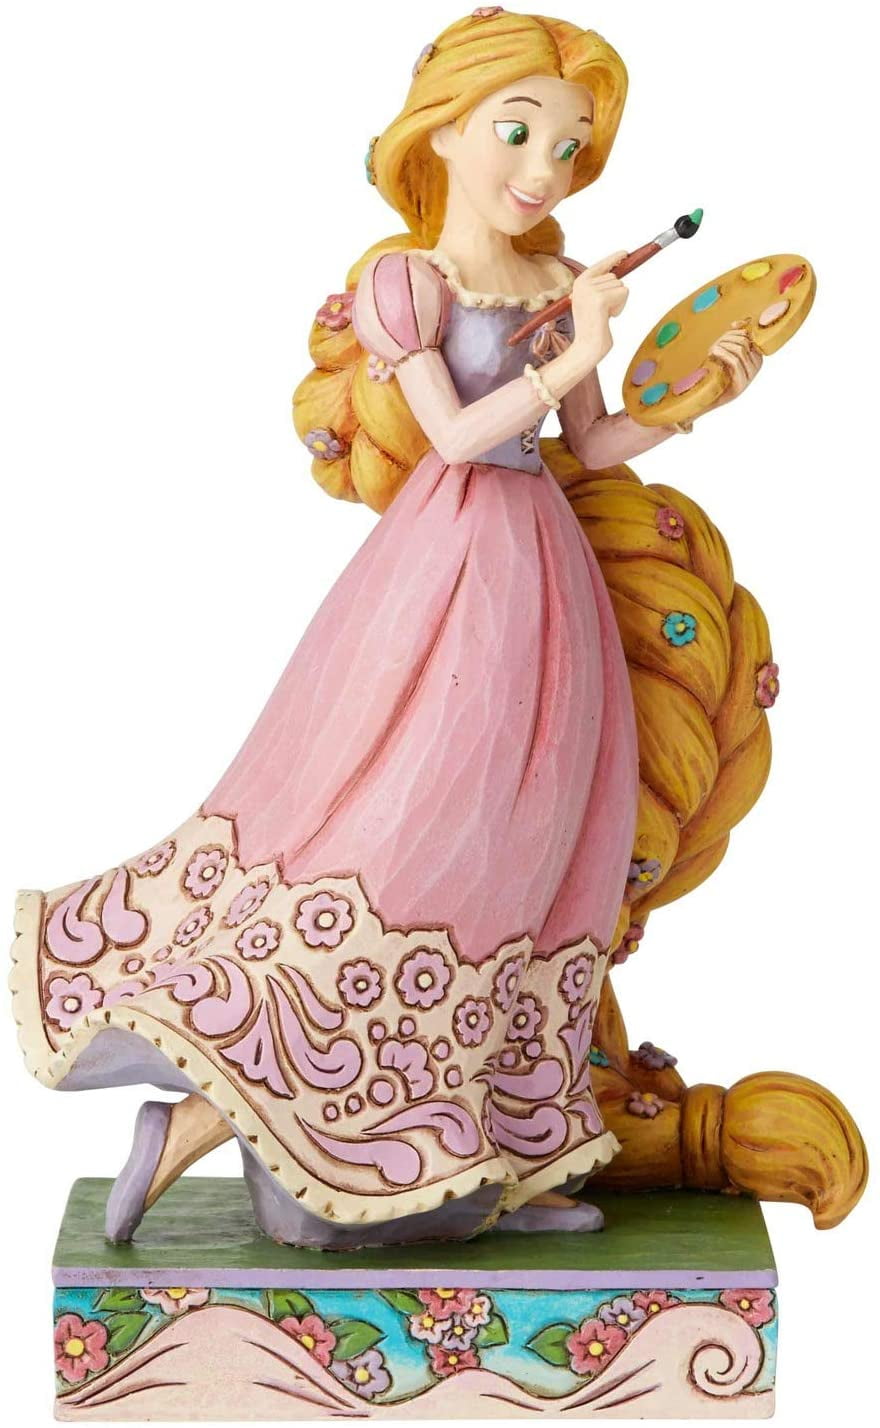 Disney Traditions by Jim Shore Beauty and the Beast Carved by Heart Stone  Resin Figurine, 7.75”